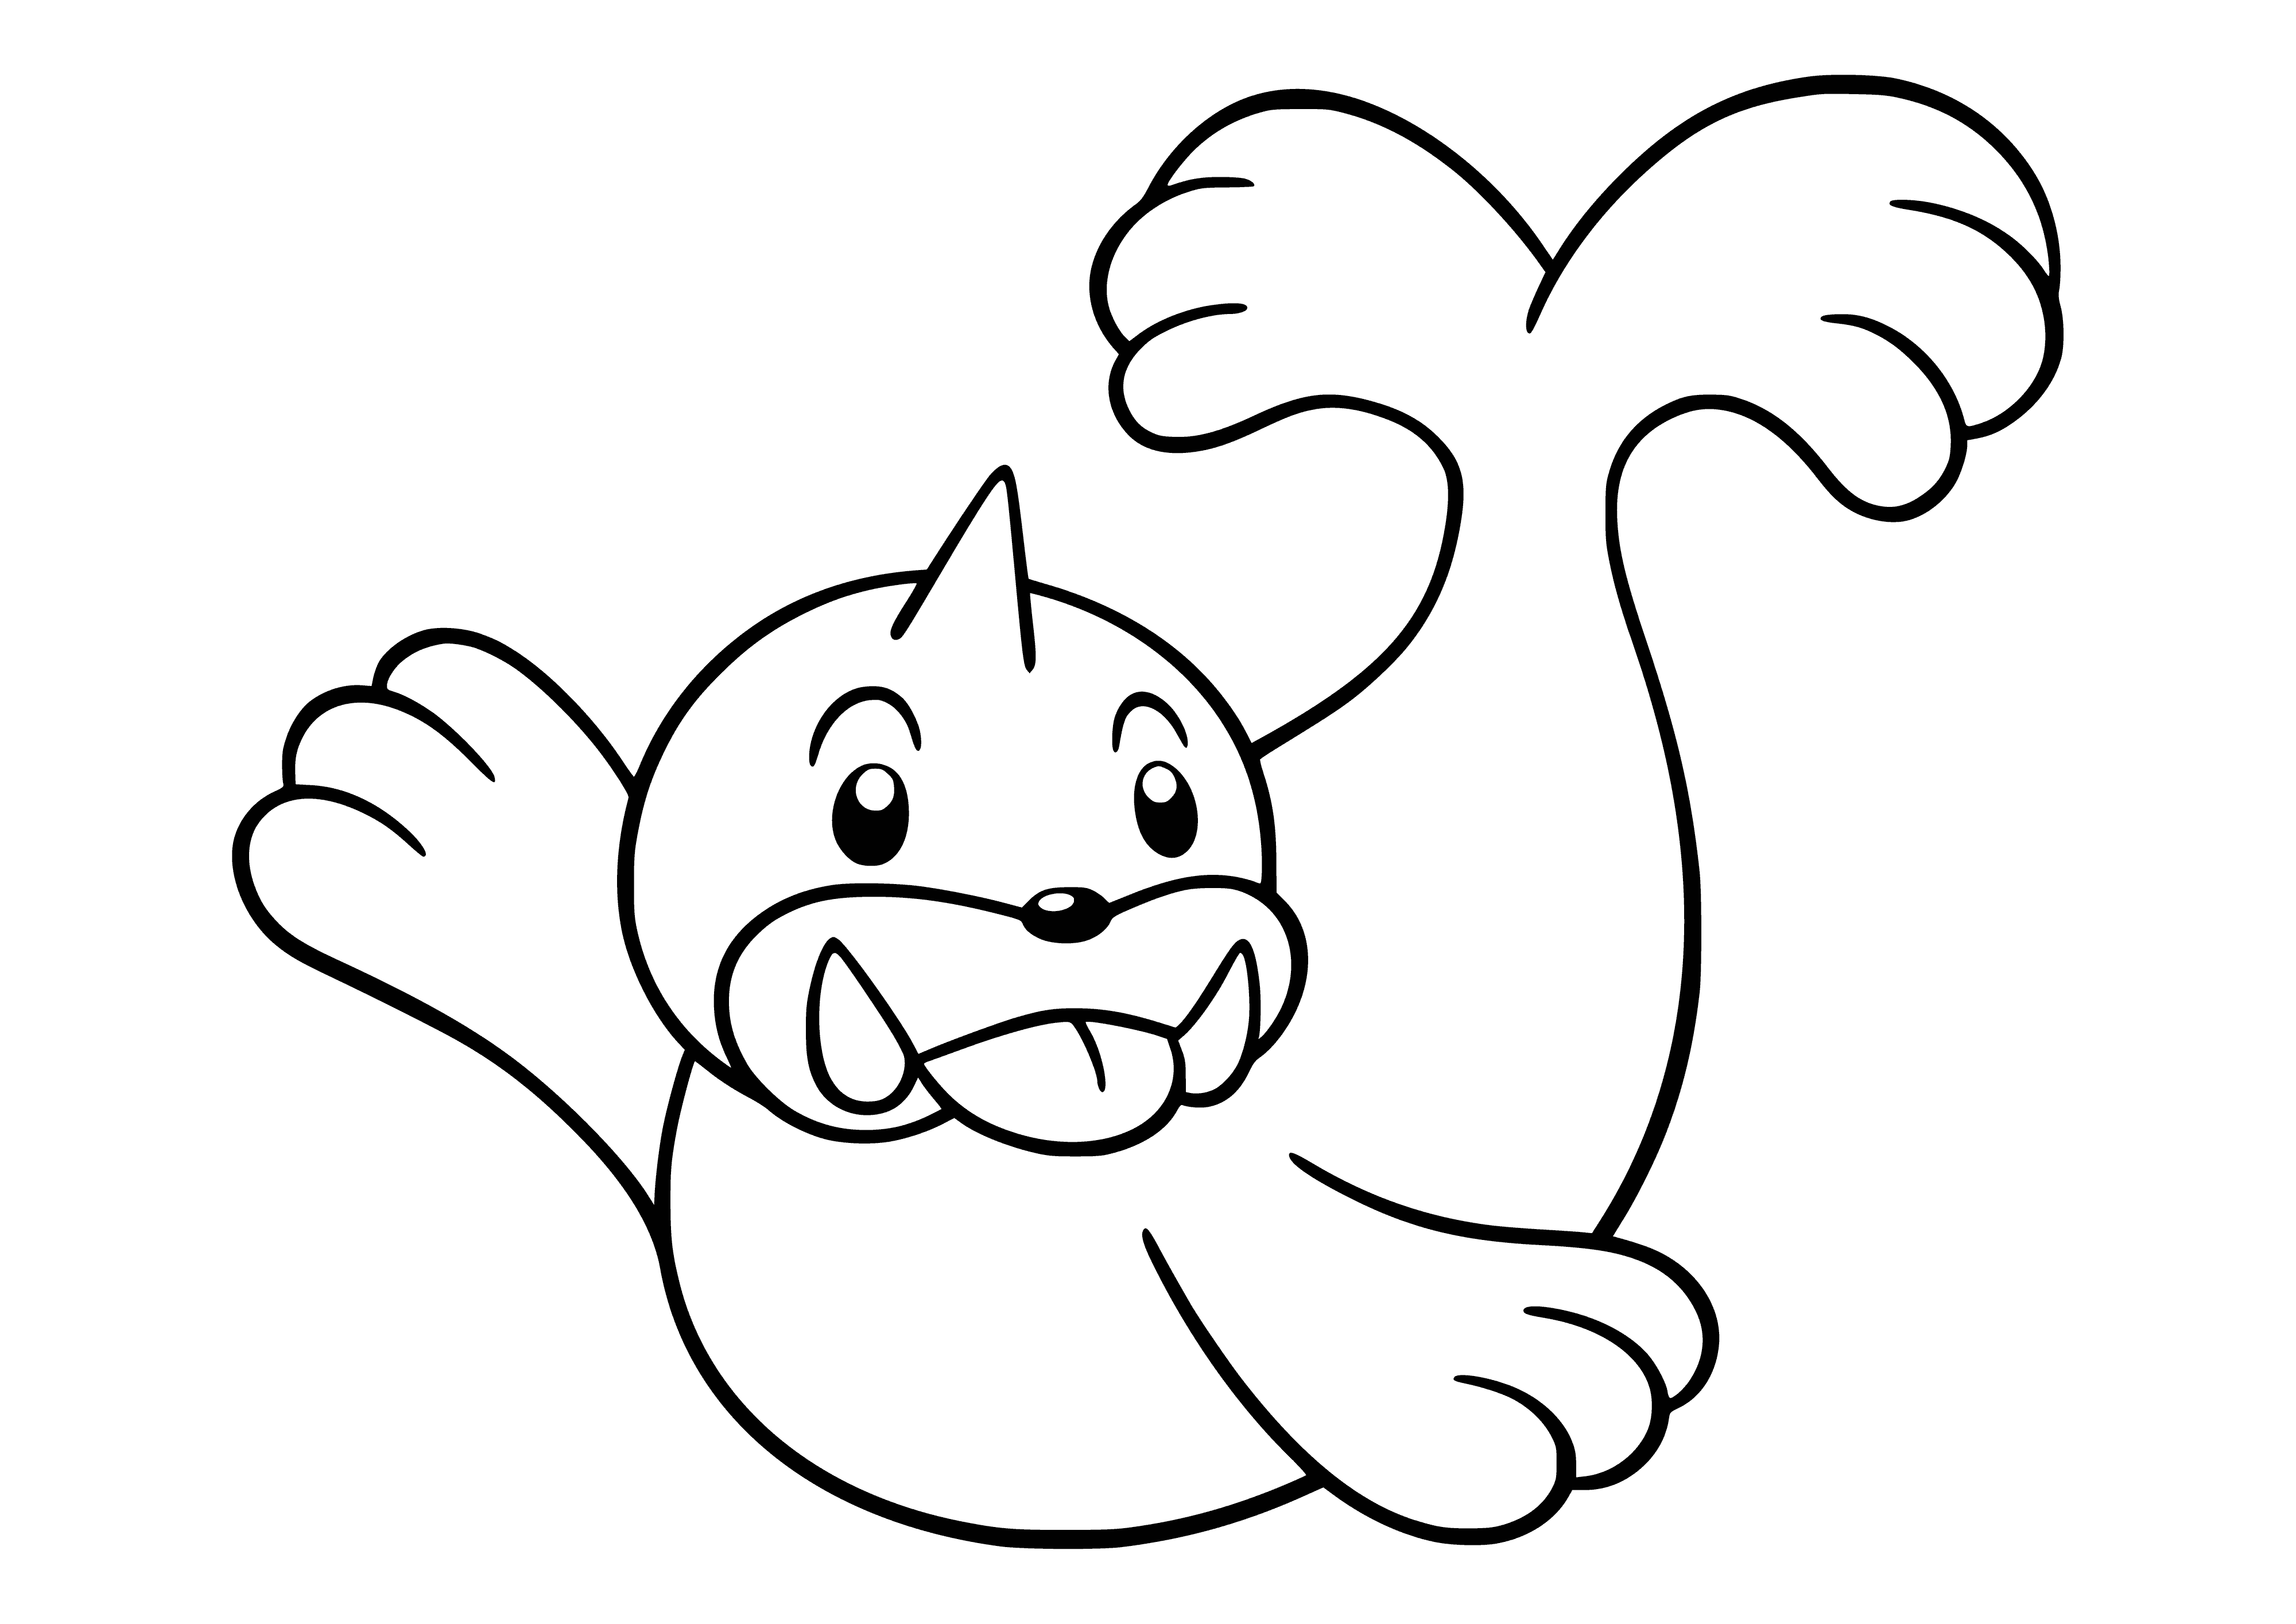 coloring page: Seel: seal-like Pkmn w/ blue body & white belly; round head, black eyes, white oval; black triangular nose & white mouth; two blue fins & white tail.